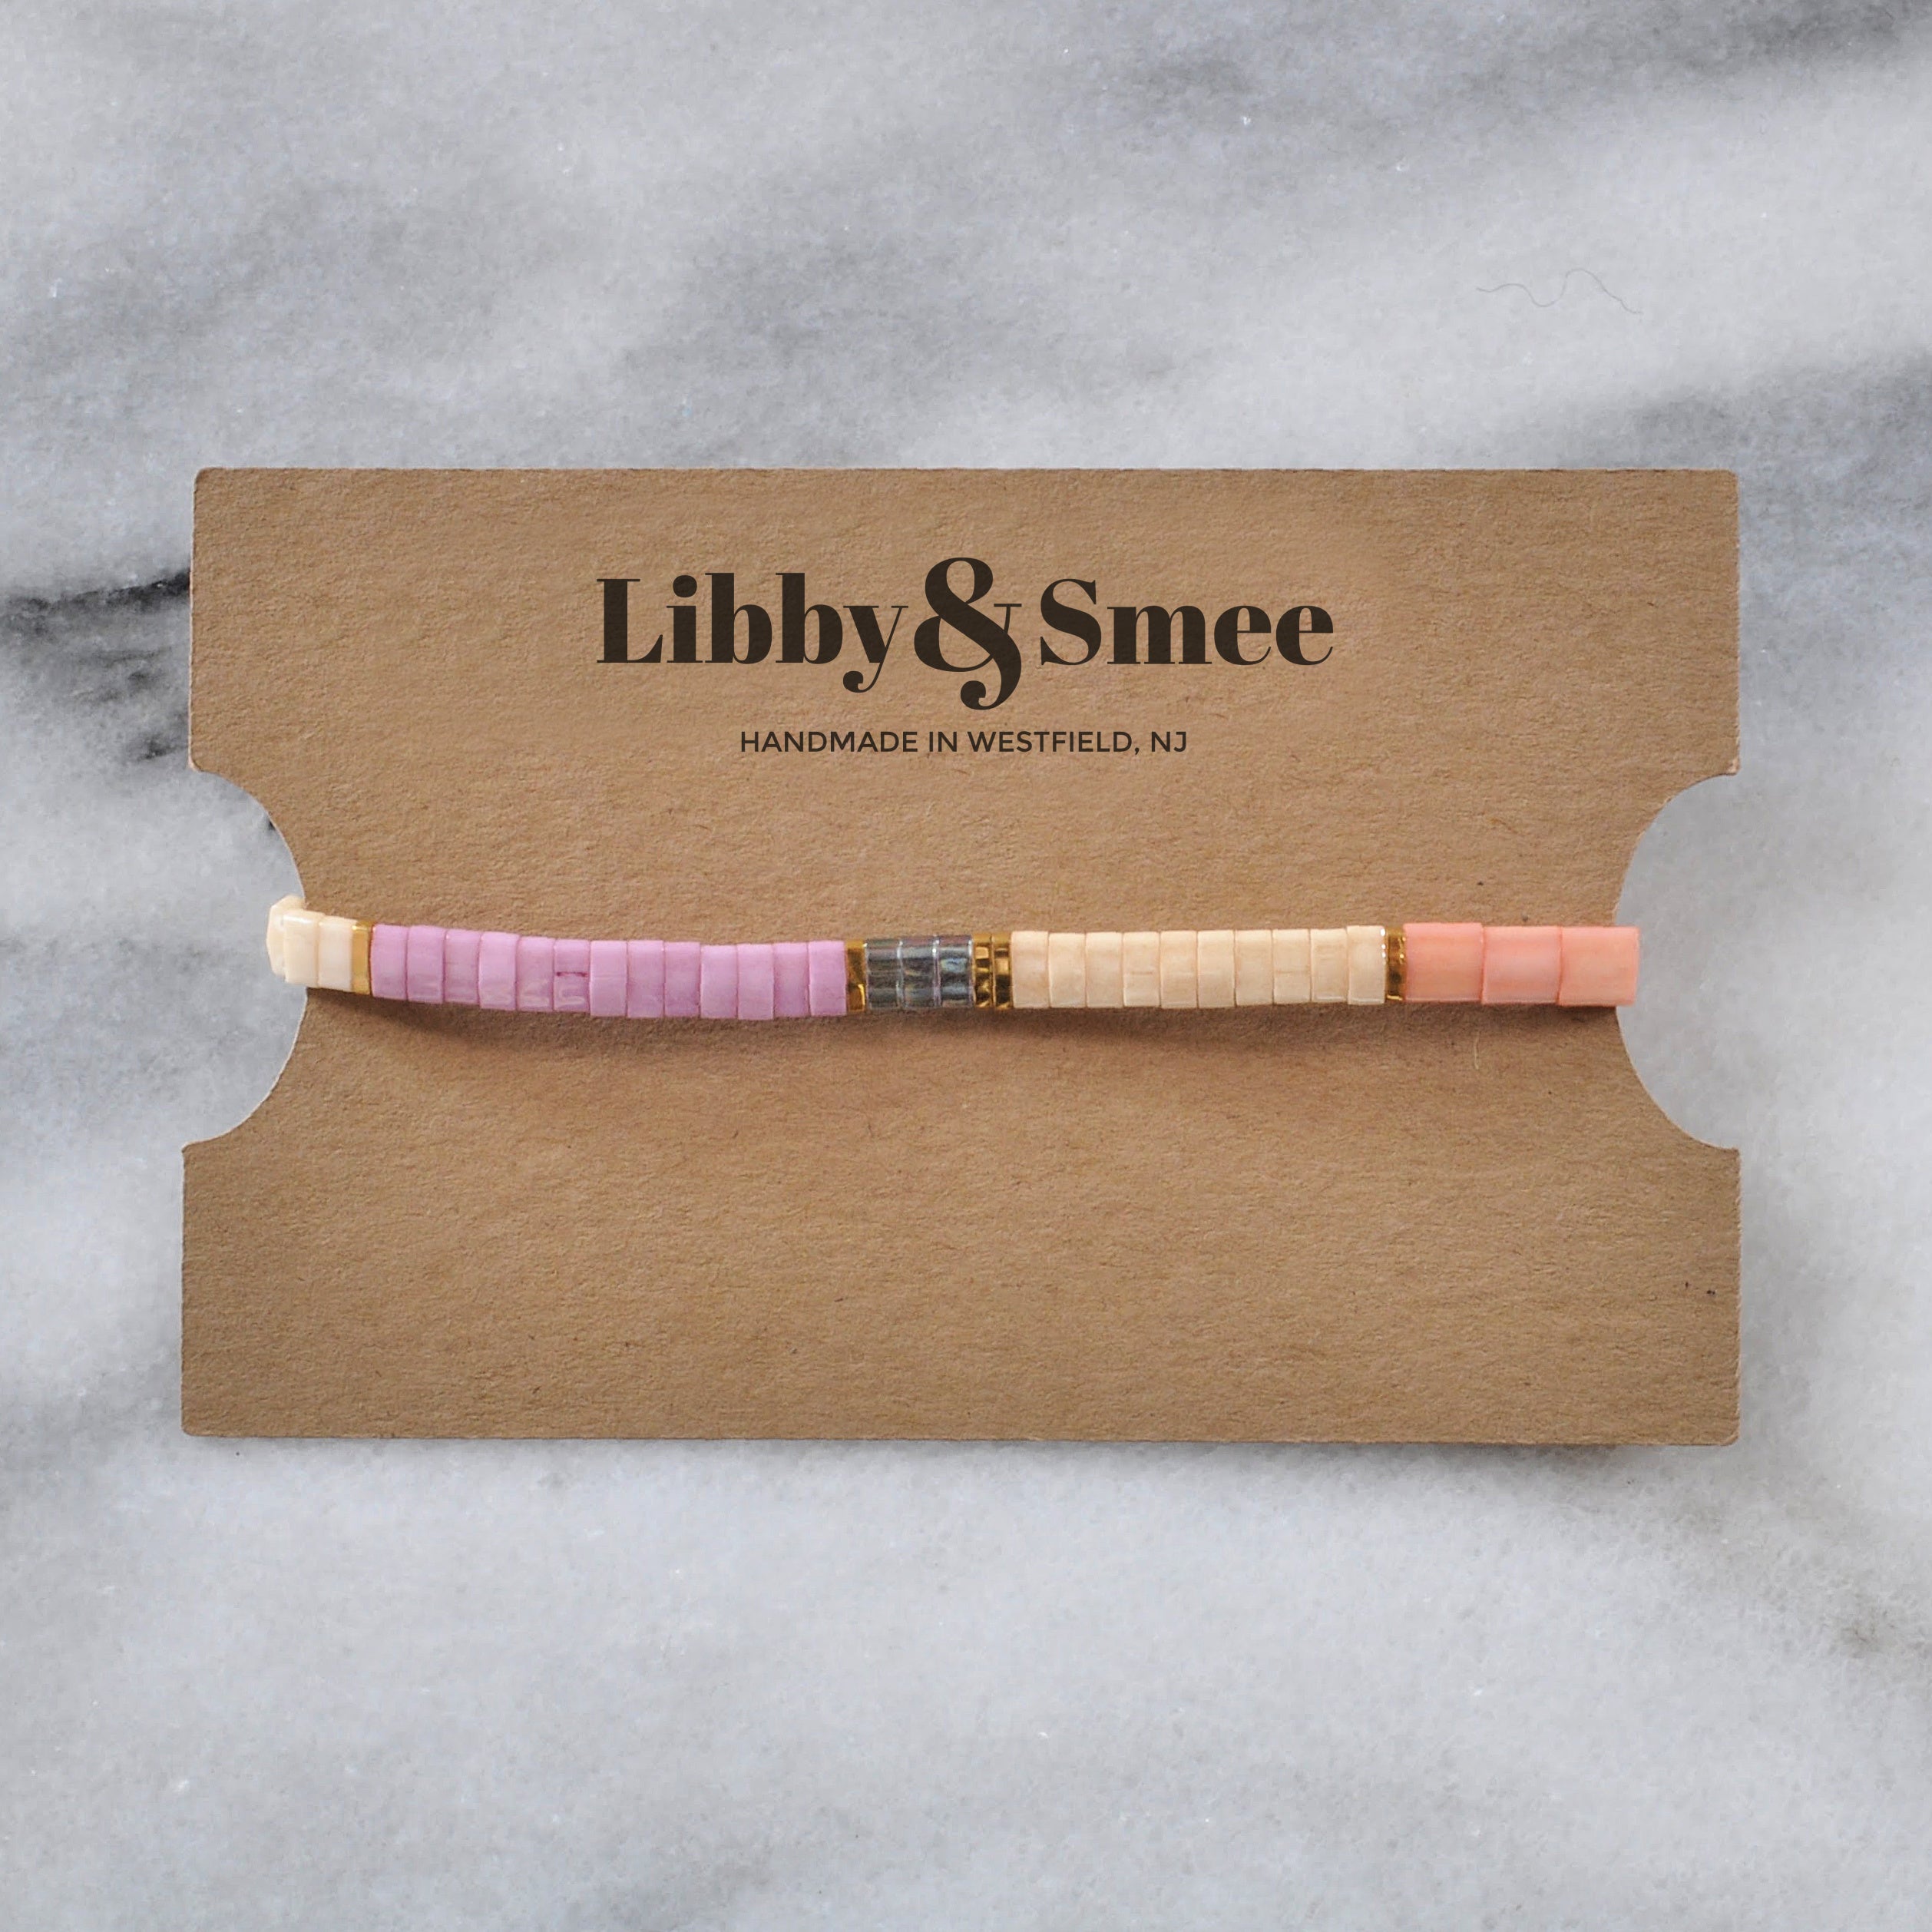 Libby & Smee stretch tile bracelet in Cotton Candy Colorblock